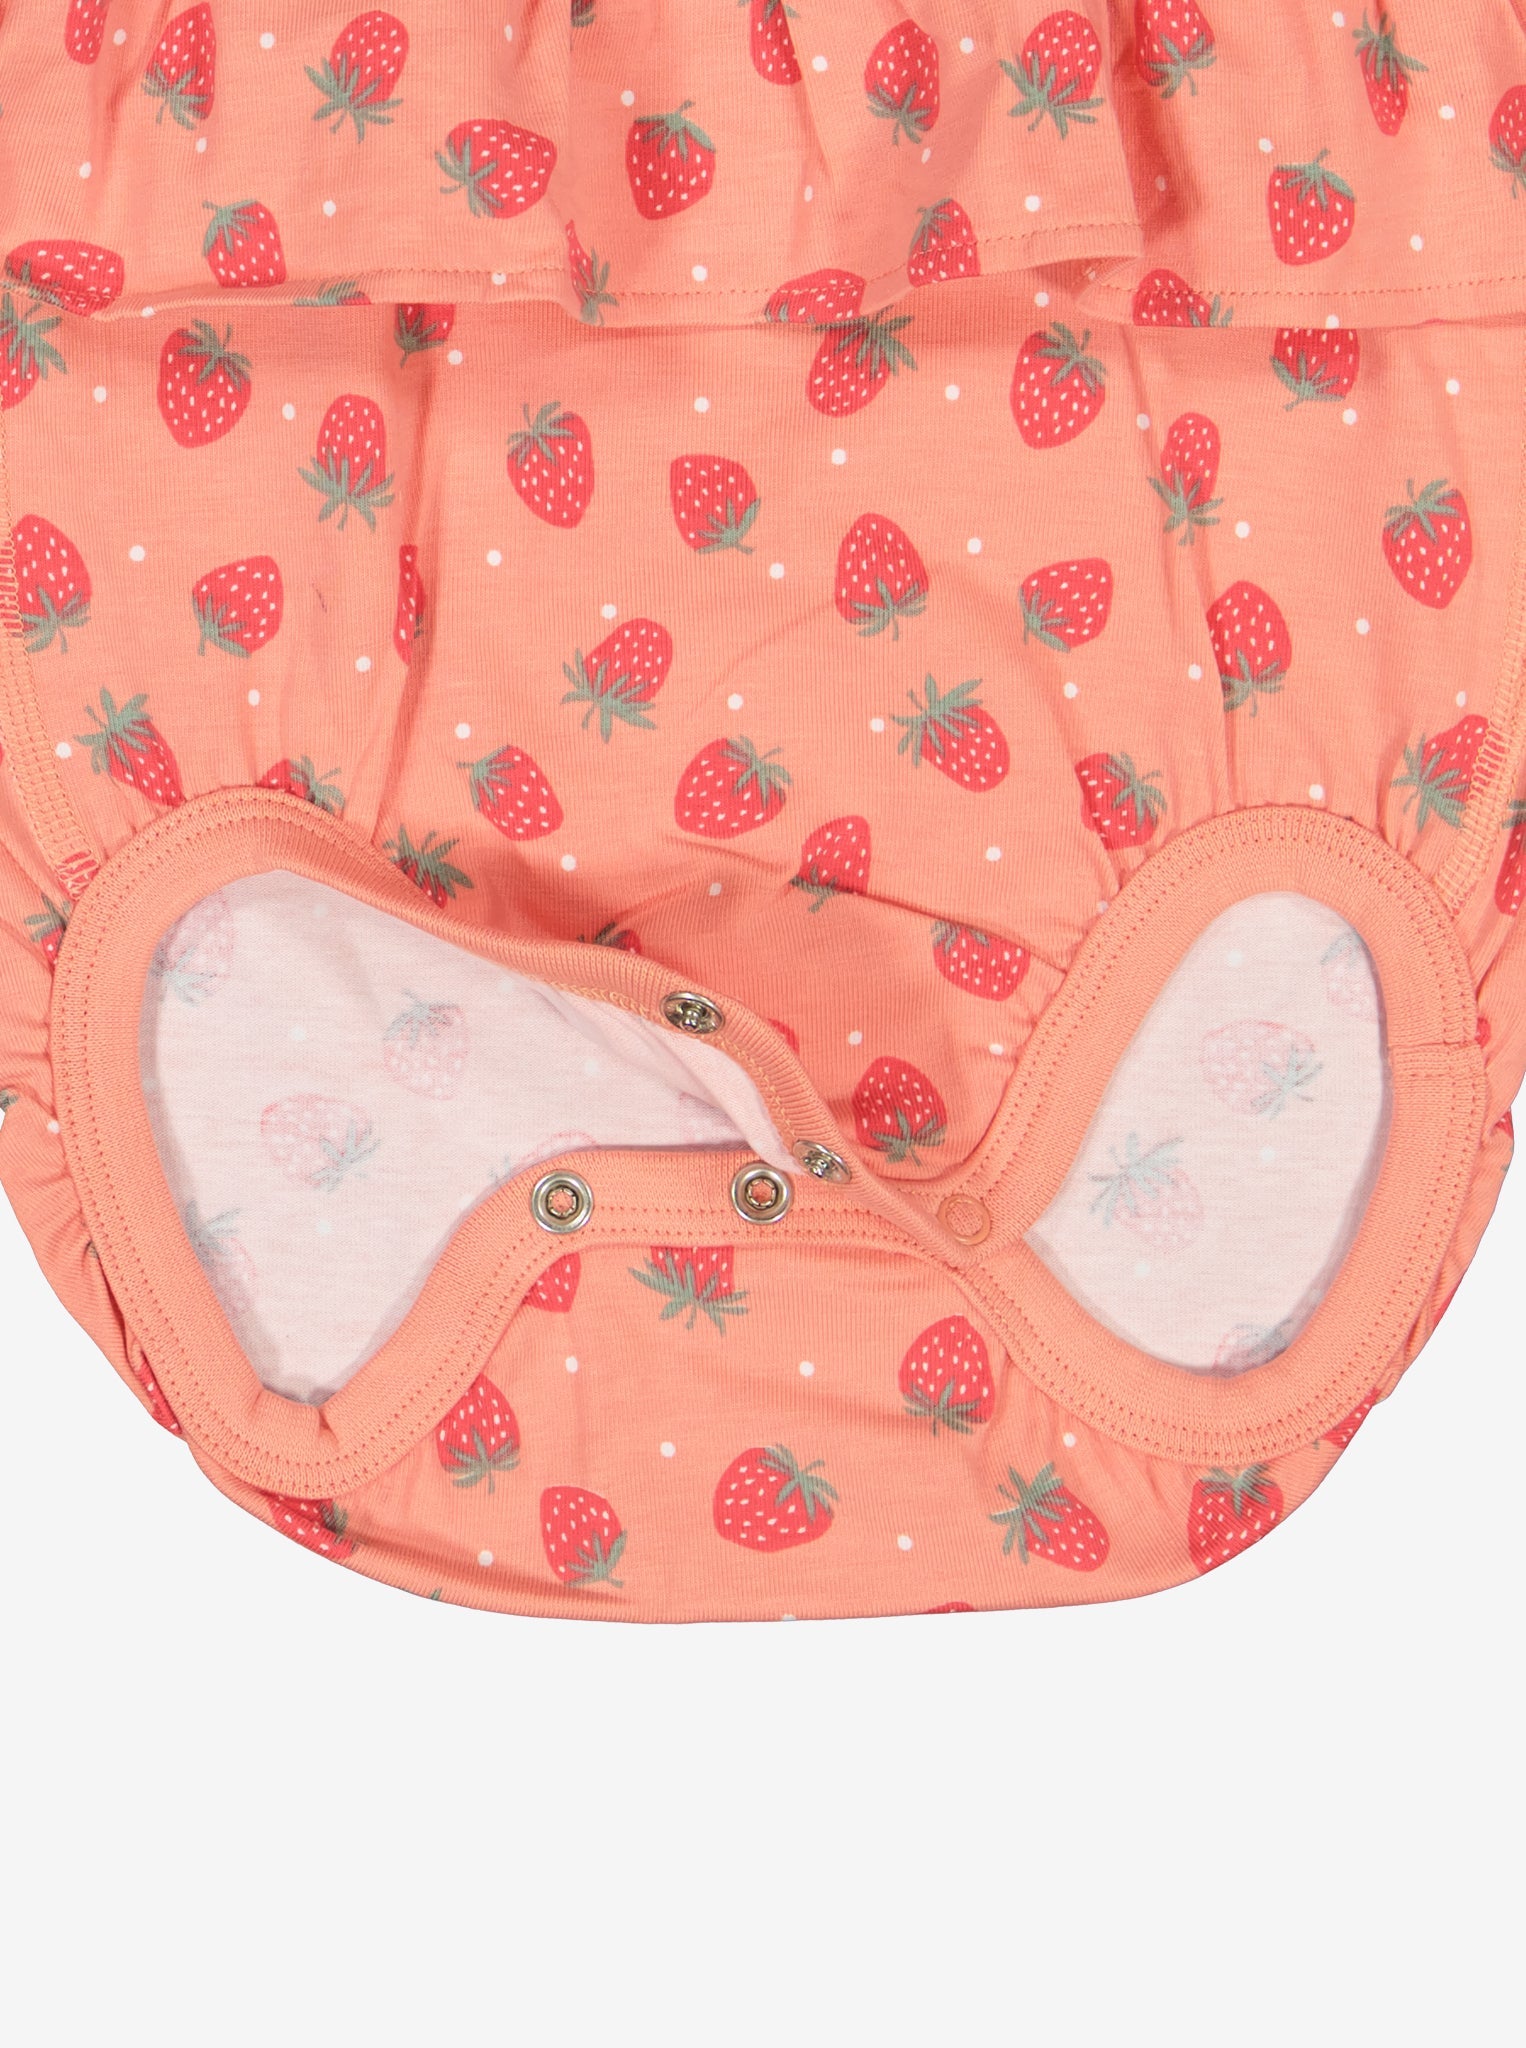 Strawberry Print Newborn Babygrow from Polarn O. Pyret Kidswear. Made from ethically sourced materials.